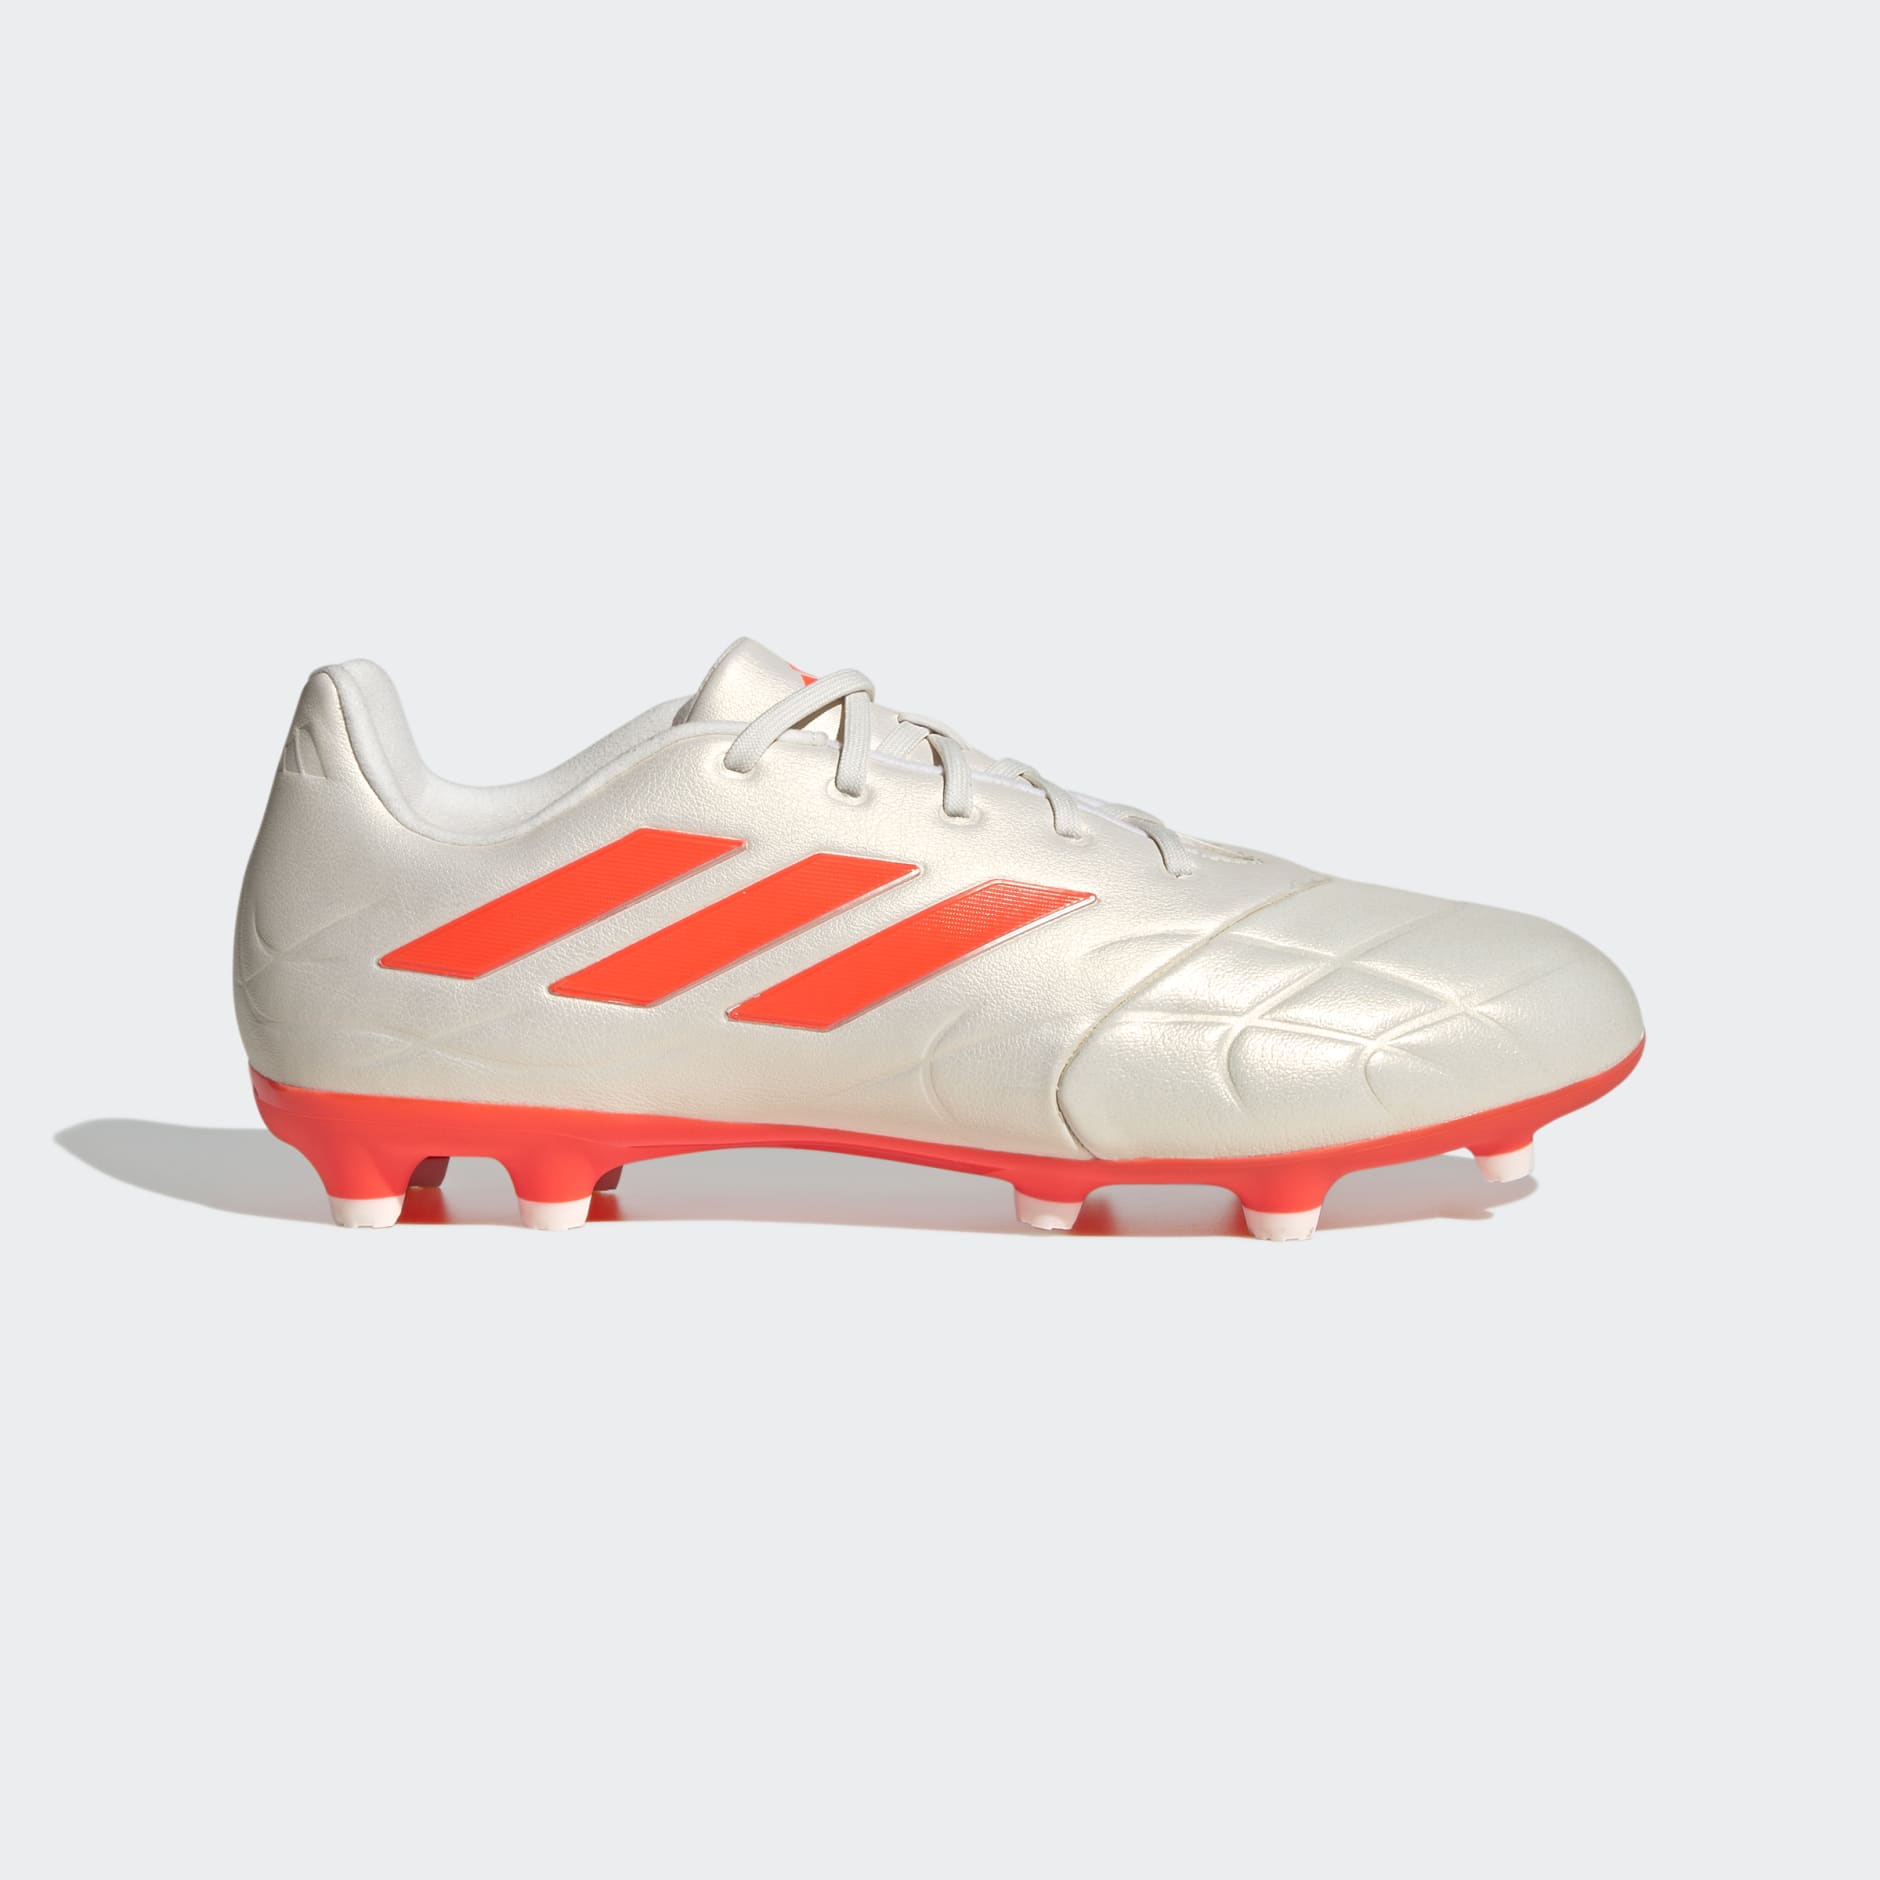 Indulgente retrasar Capitán Brie adidas Copa Pure.3 Firm Ground Boots - White | adidas KW